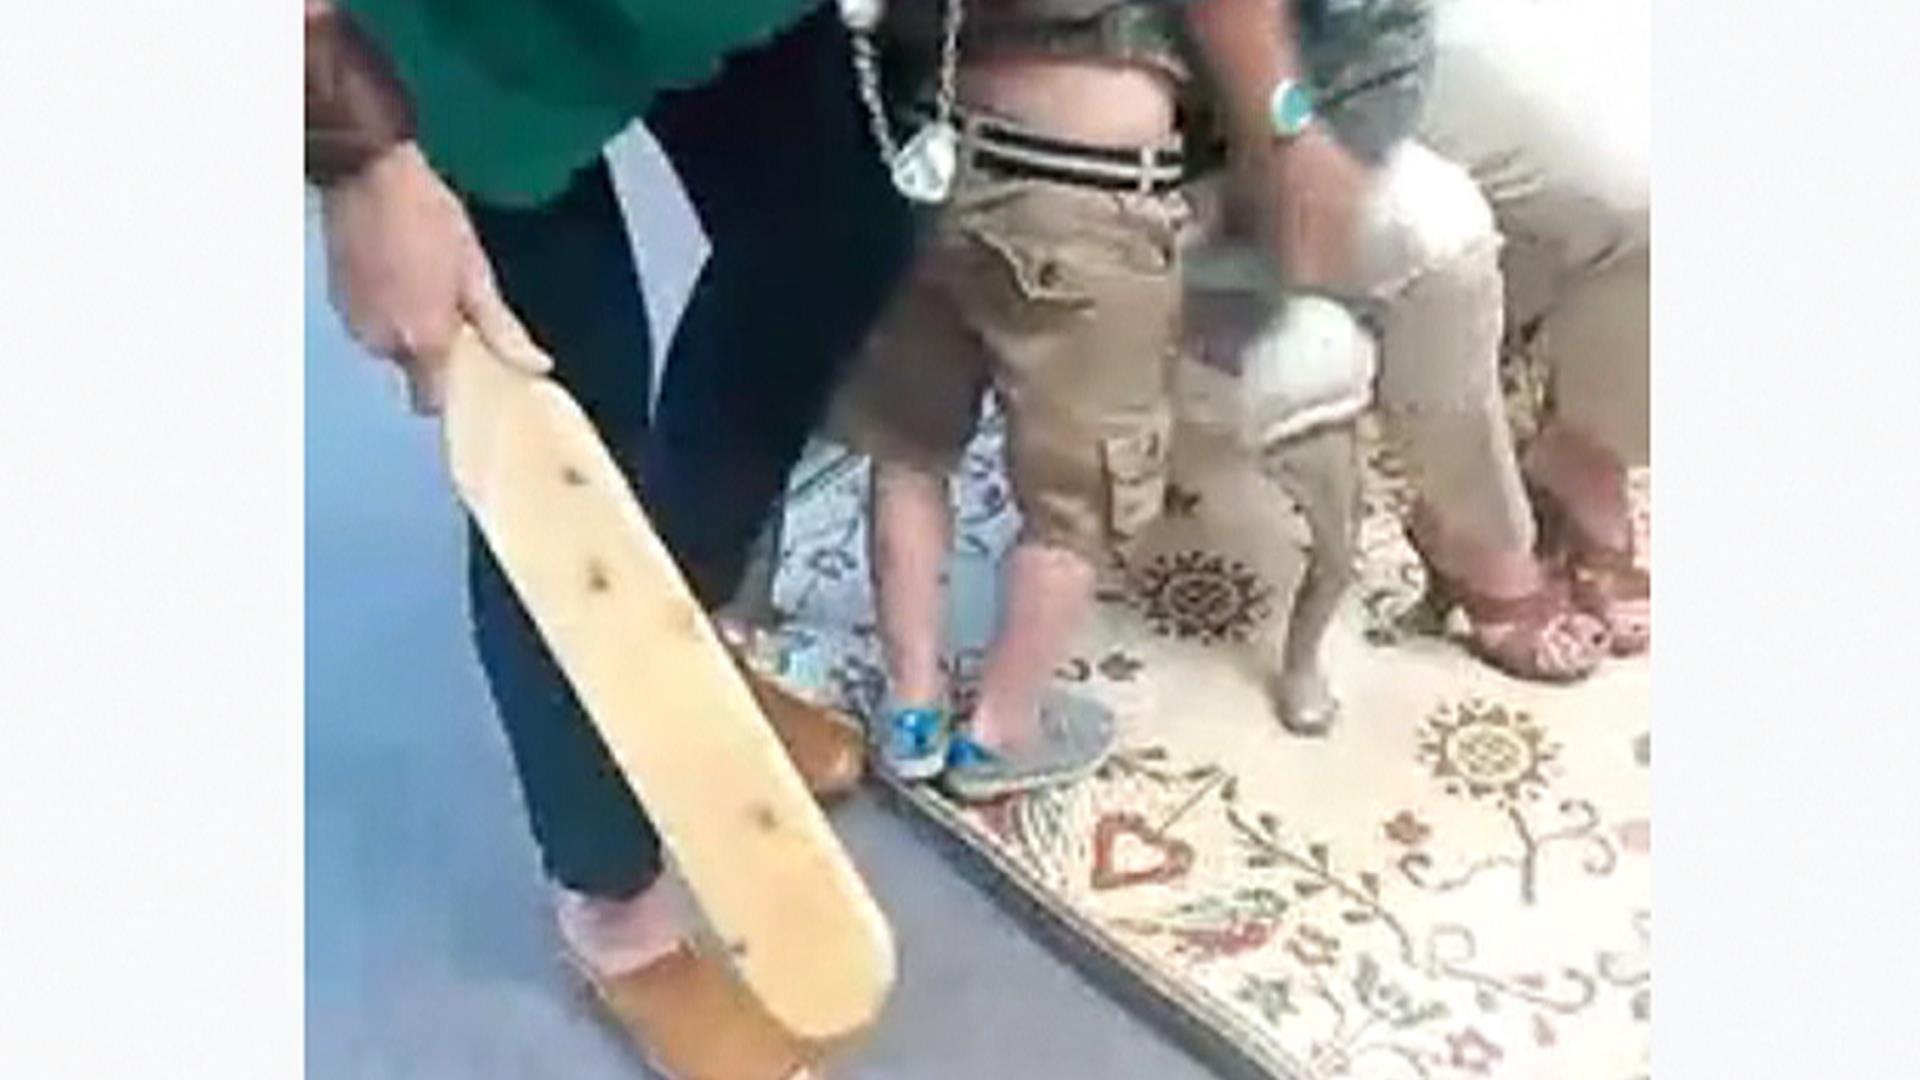 Video of Child's Paddling Sparks Outrage Online.